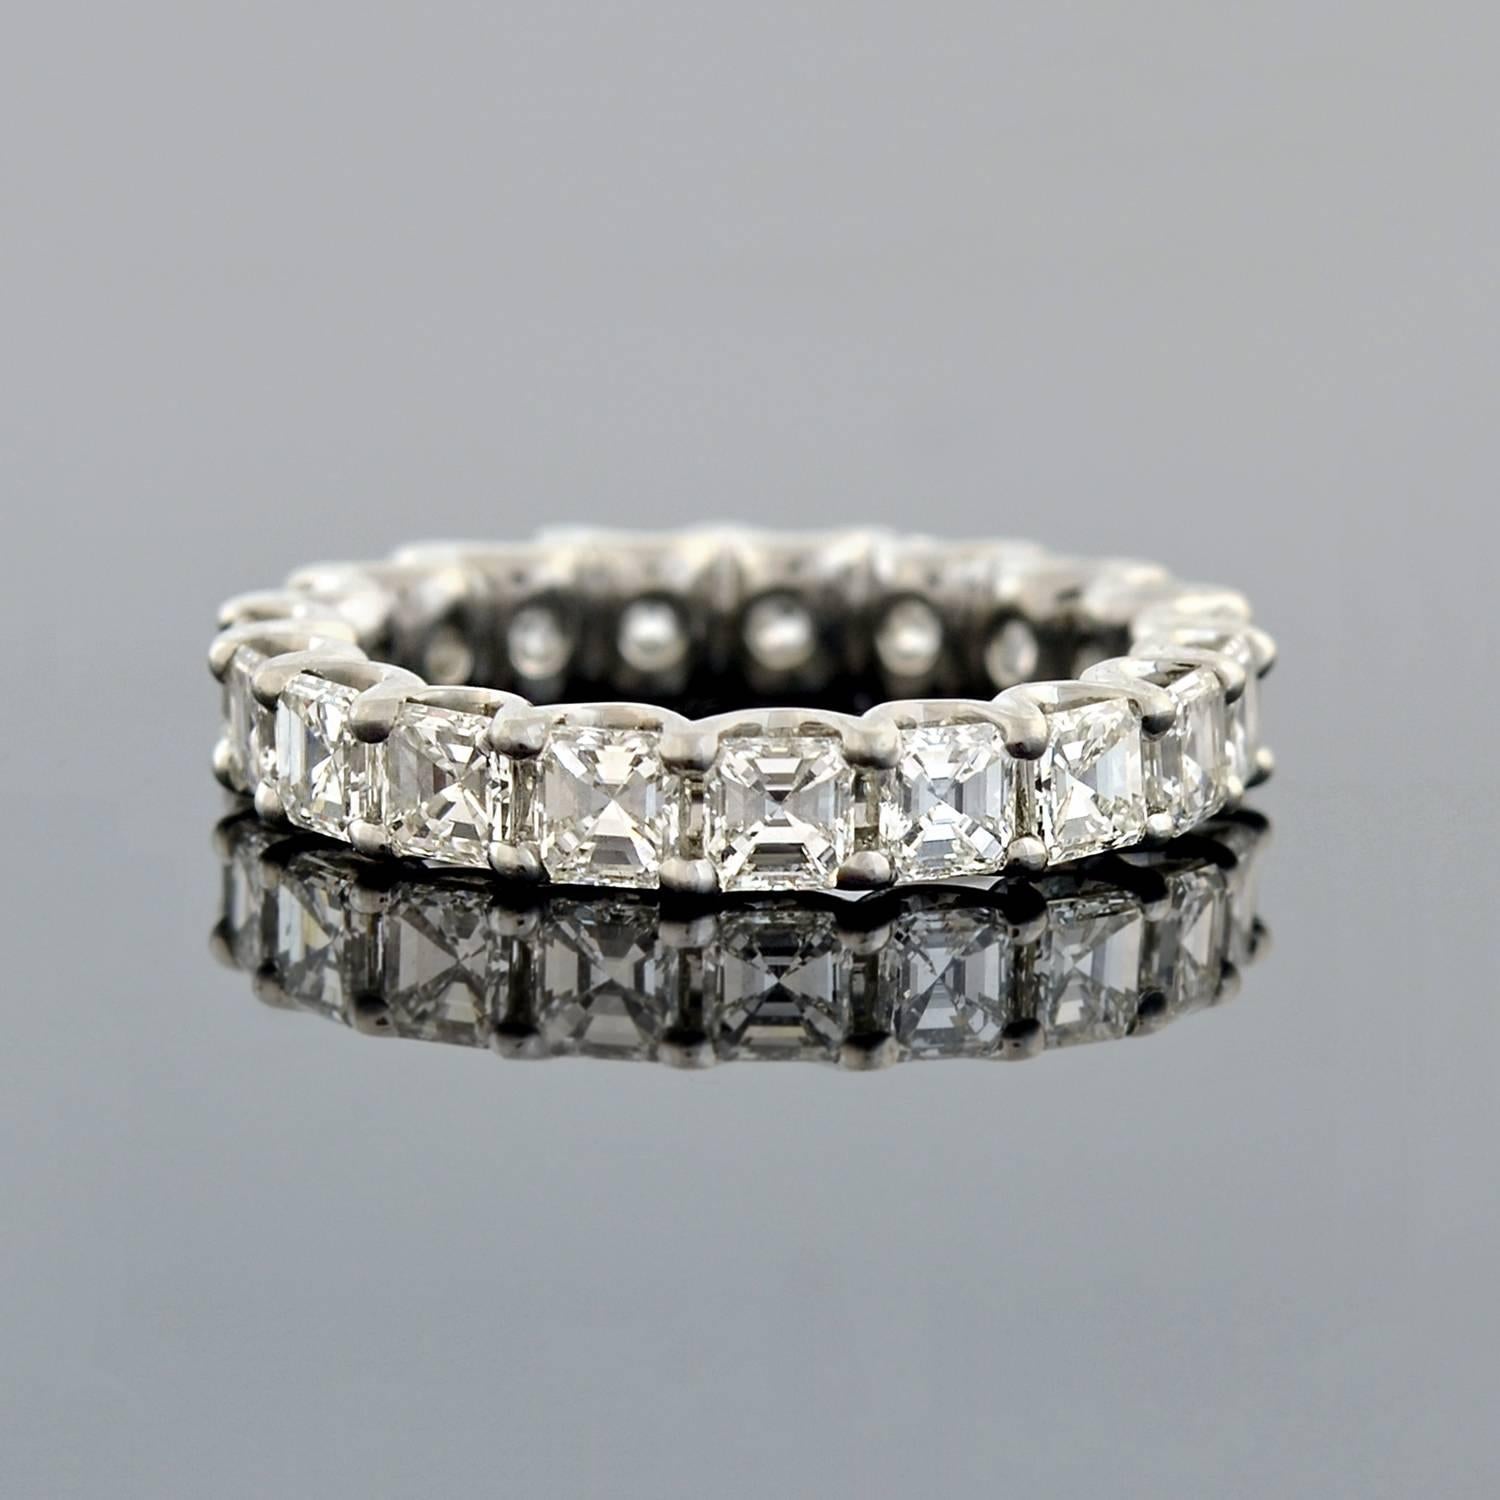 This estate diamond eternity band is quite spectacular! Made of platinum, the ring features a row of 19 outstanding Asscher Cut diamonds, which carry seamlessly around the surface in a shared prong setting. The sparkling stones have H-I range color,